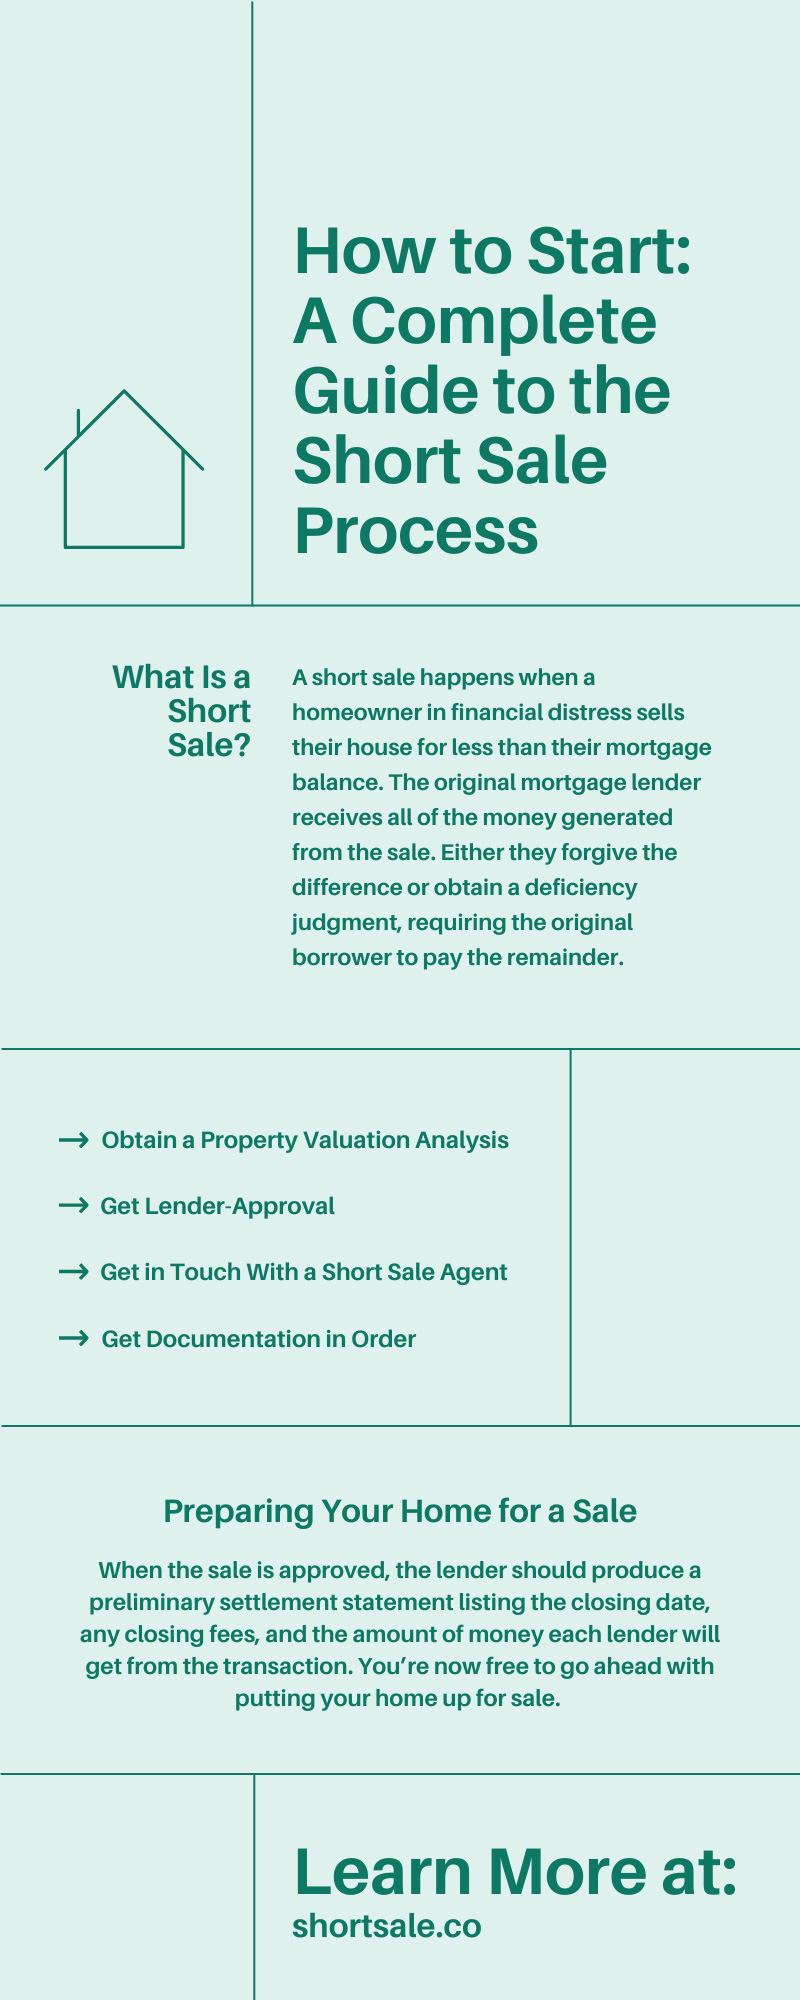 How to Start: A Complete Guide to the Short Sale Process